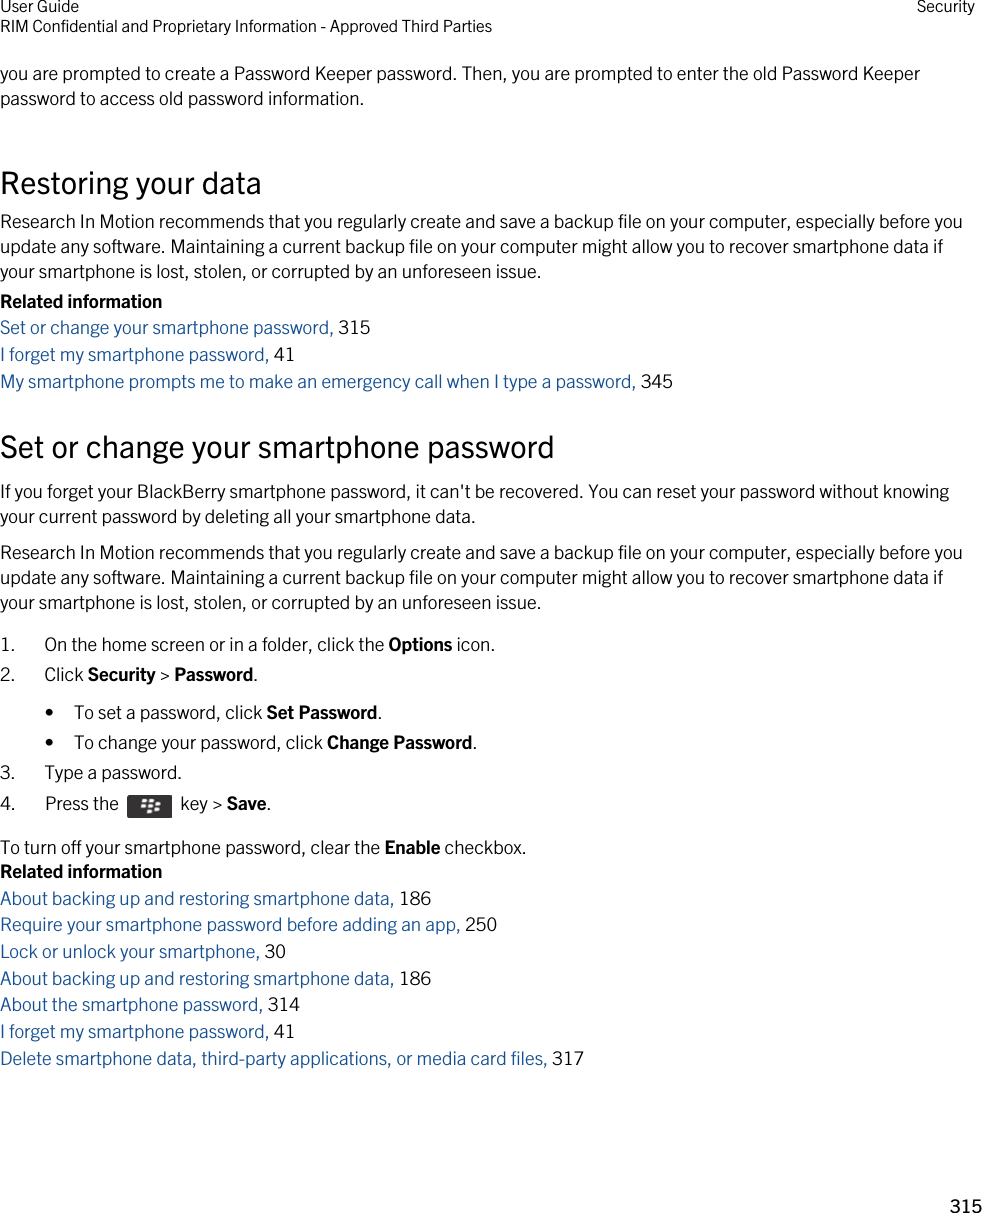 you are prompted to create a Password Keeper password. Then, you are prompted to enter the old Password Keeper password to access old password information.Restoring your dataResearch In Motion recommends that you regularly create and save a backup file on your computer, especially before you update any software. Maintaining a current backup file on your computer might allow you to recover smartphone data if your smartphone is lost, stolen, or corrupted by an unforeseen issue.Related informationSet or change your smartphone password, 315I forget my smartphone password, 41 My smartphone prompts me to make an emergency call when I type a password, 345Set or change your smartphone passwordIf you forget your BlackBerry smartphone password, it can&apos;t be recovered. You can reset your password without knowing your current password by deleting all your smartphone data.Research In Motion recommends that you regularly create and save a backup file on your computer, especially before you update any software. Maintaining a current backup file on your computer might allow you to recover smartphone data if your smartphone is lost, stolen, or corrupted by an unforeseen issue.1. On the home screen or in a folder, click the Options icon.2. Click Security &gt; Password.• To set a password, click Set Password.• To change your password, click Change Password.3. Type a password.4.  Press the    key &gt; Save. To turn off your smartphone password, clear the Enable checkbox.Related informationAbout backing up and restoring smartphone data, 186 Require your smartphone password before adding an app, 250 Lock or unlock your smartphone, 30 About backing up and restoring smartphone data, 186 About the smartphone password, 314 I forget my smartphone password, 41 Delete smartphone data, third-party applications, or media card files, 317User GuideRIM Confidential and Proprietary Information - Approved Third Parties Security315 